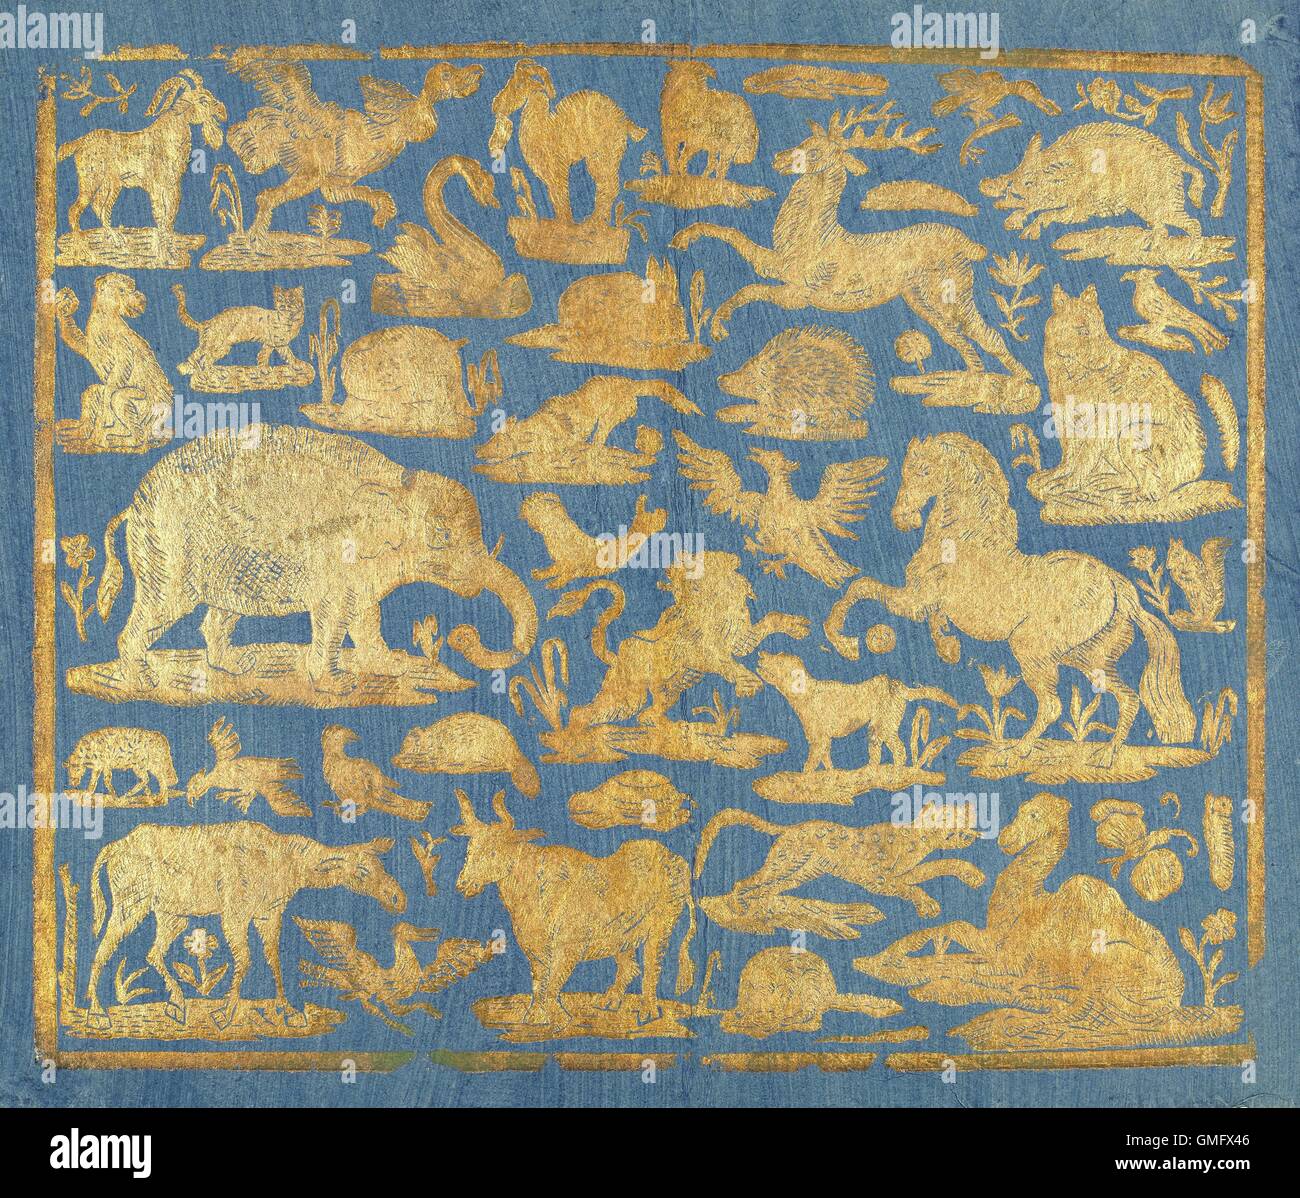 Blue brocade paper decorated with gold animals, c. 1750-1800. Leaf includes domesticated and wild mammals and birds (BSLOC 2016 2 147) Stock Photo